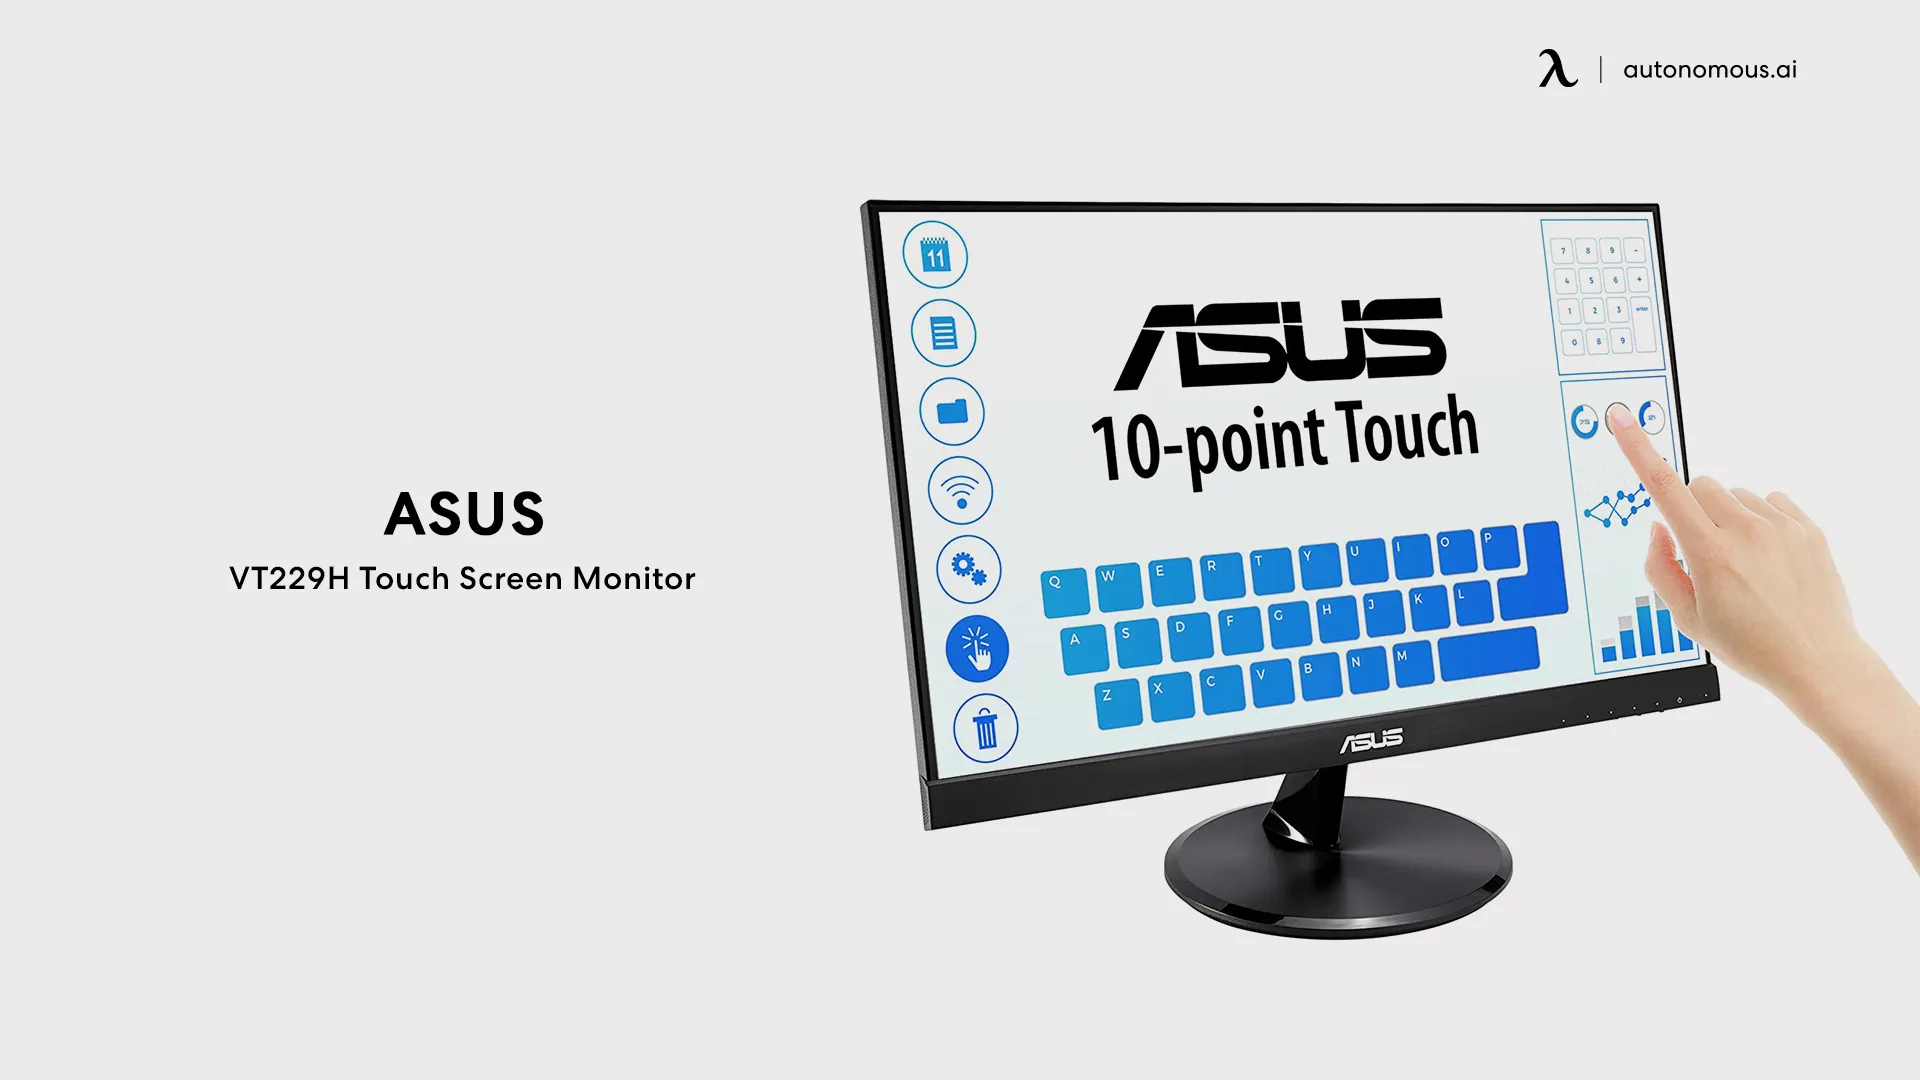 Asus VT229H touch screen monitor